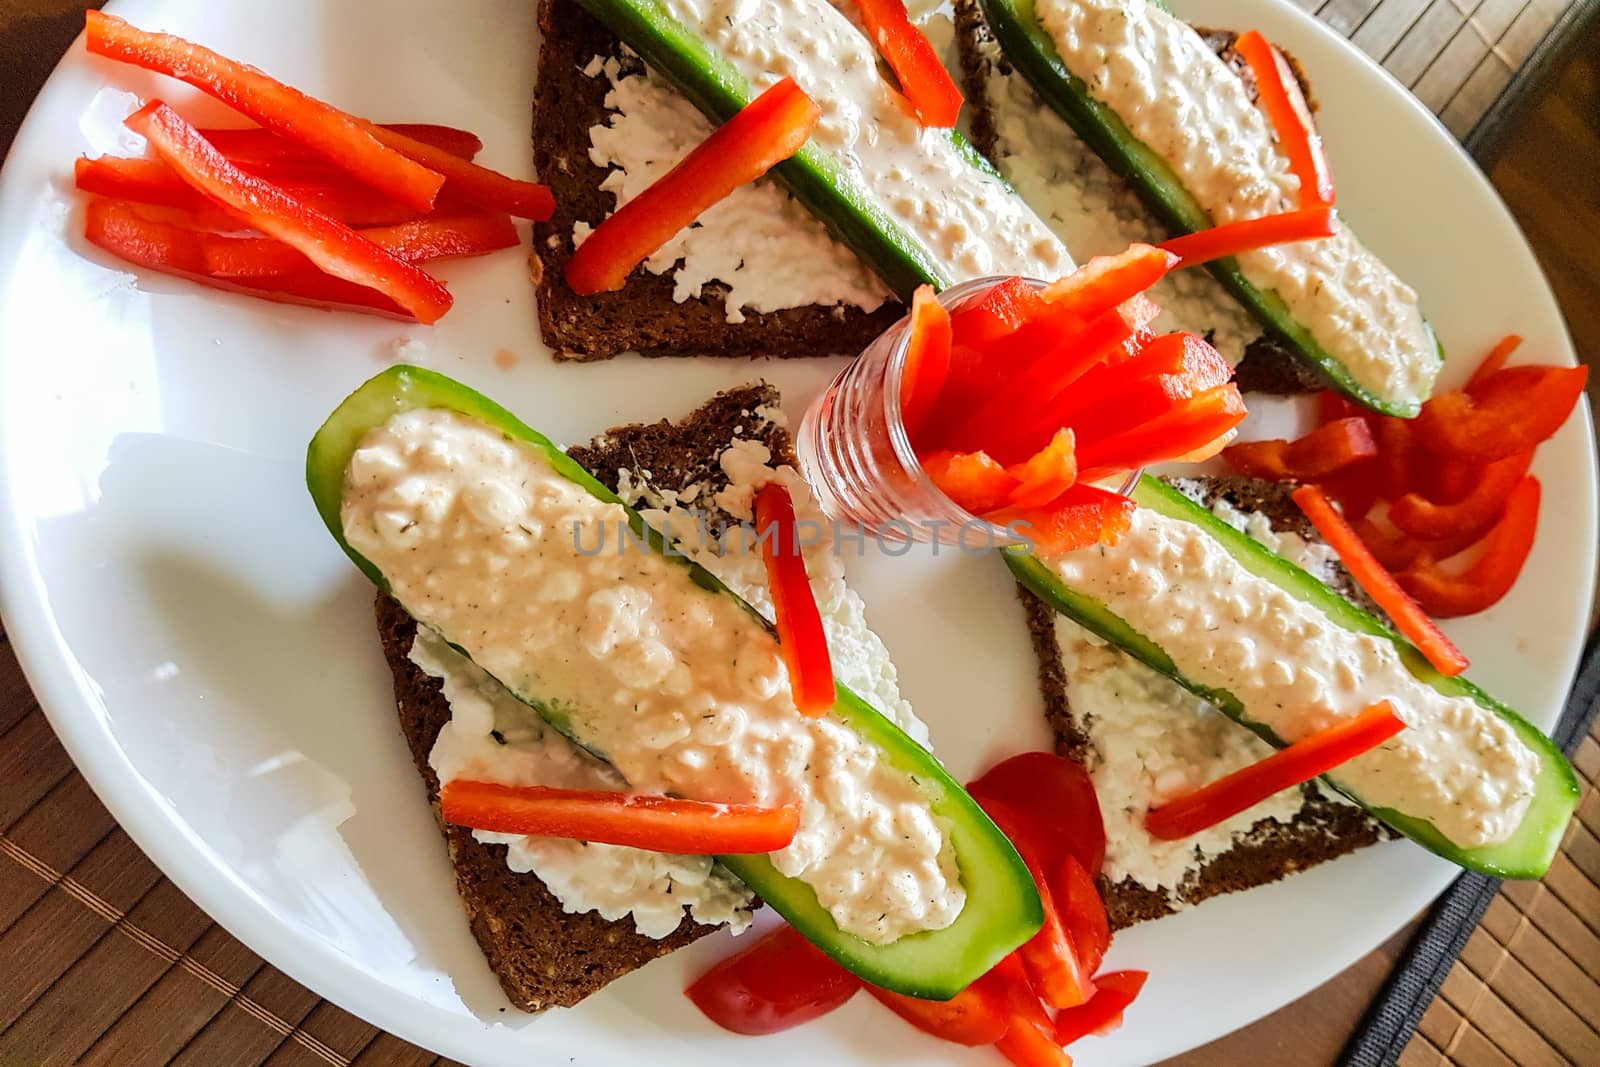 Cucumber boat with fresh quark, pepper strips on black bread     by JFsPic